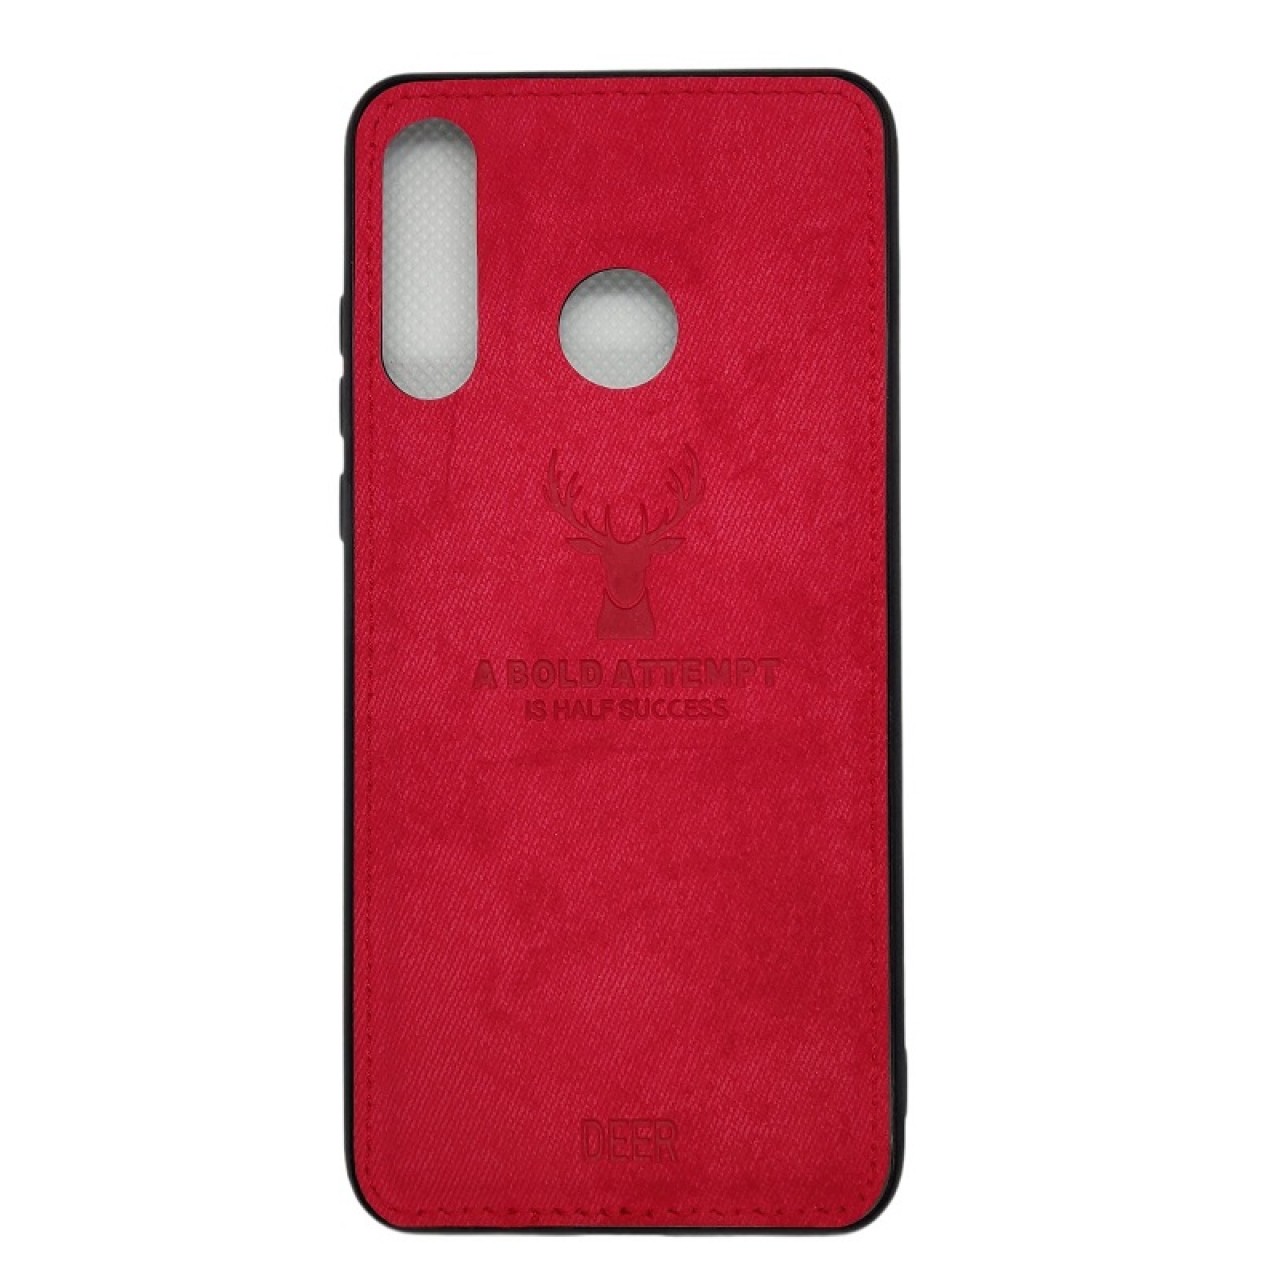 DEER CLOTH BACK CASE FOR HUAWEI P30 LITE - RED